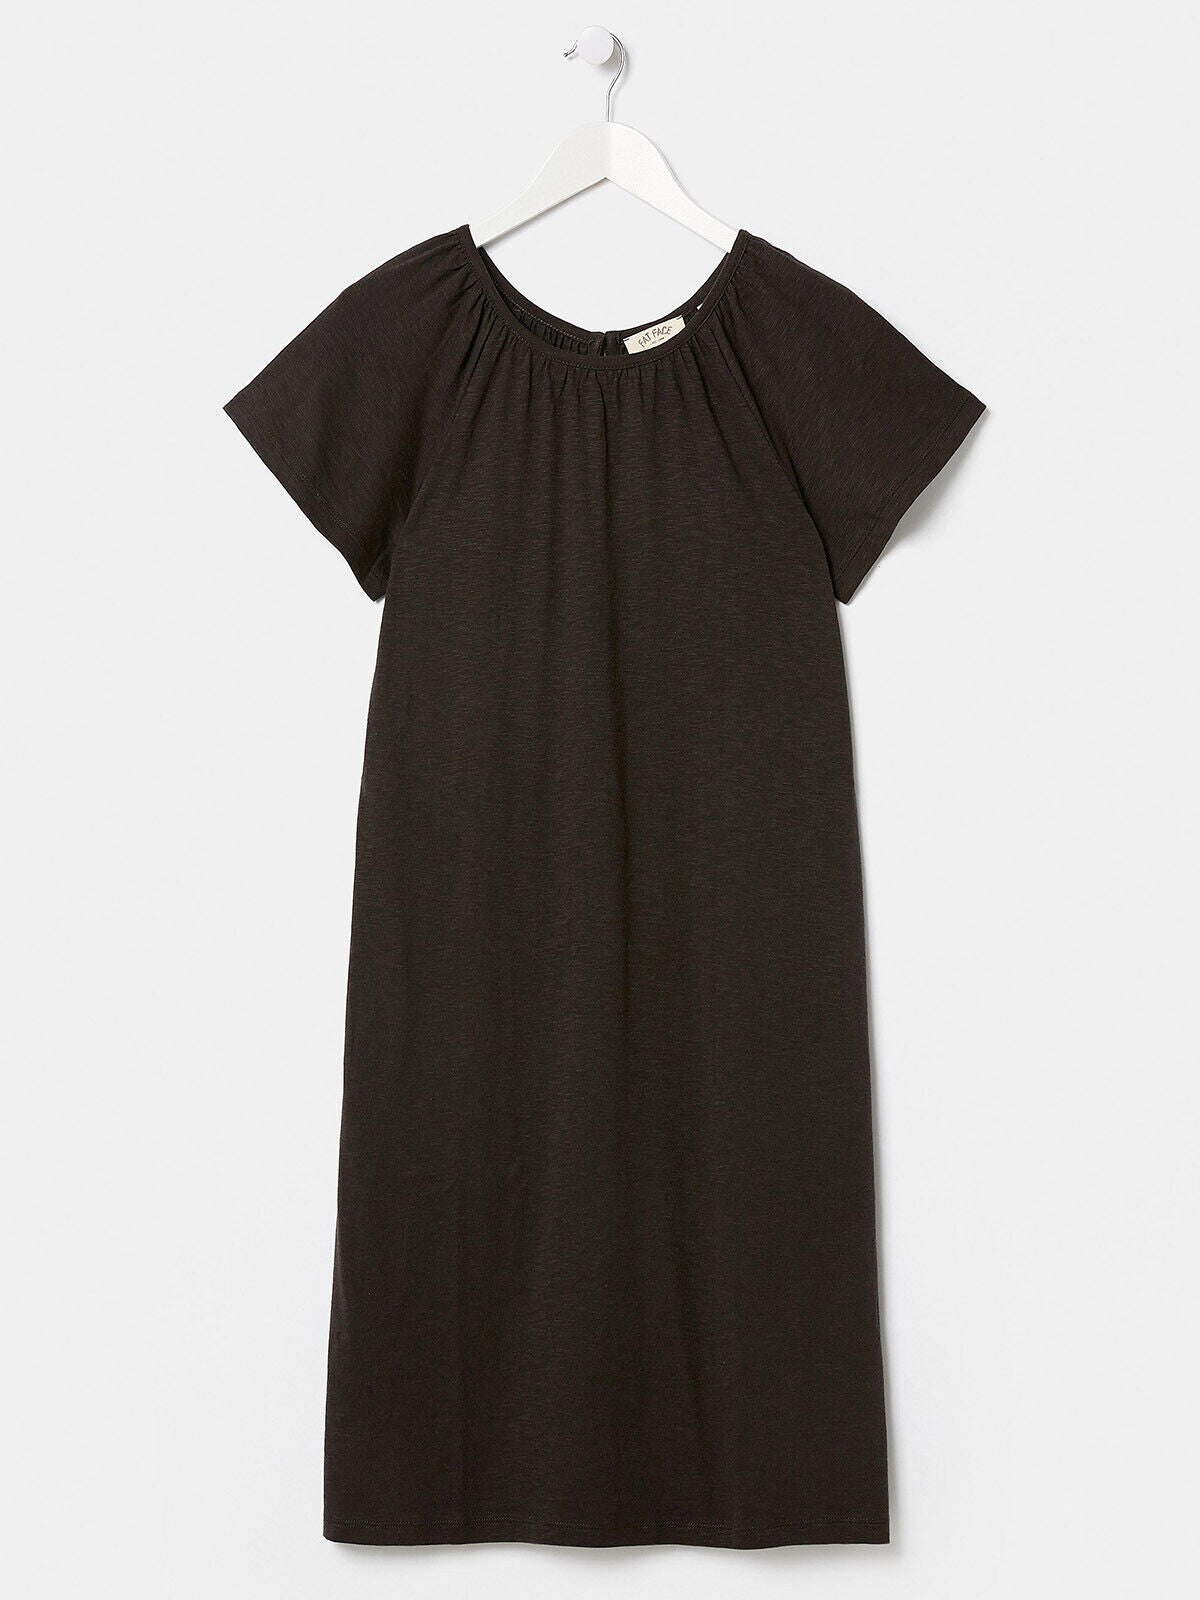 EX Fat Face Black Lucy Cotton Modal Jersey Dress in Sizes 10, 12, 18 RRP £45